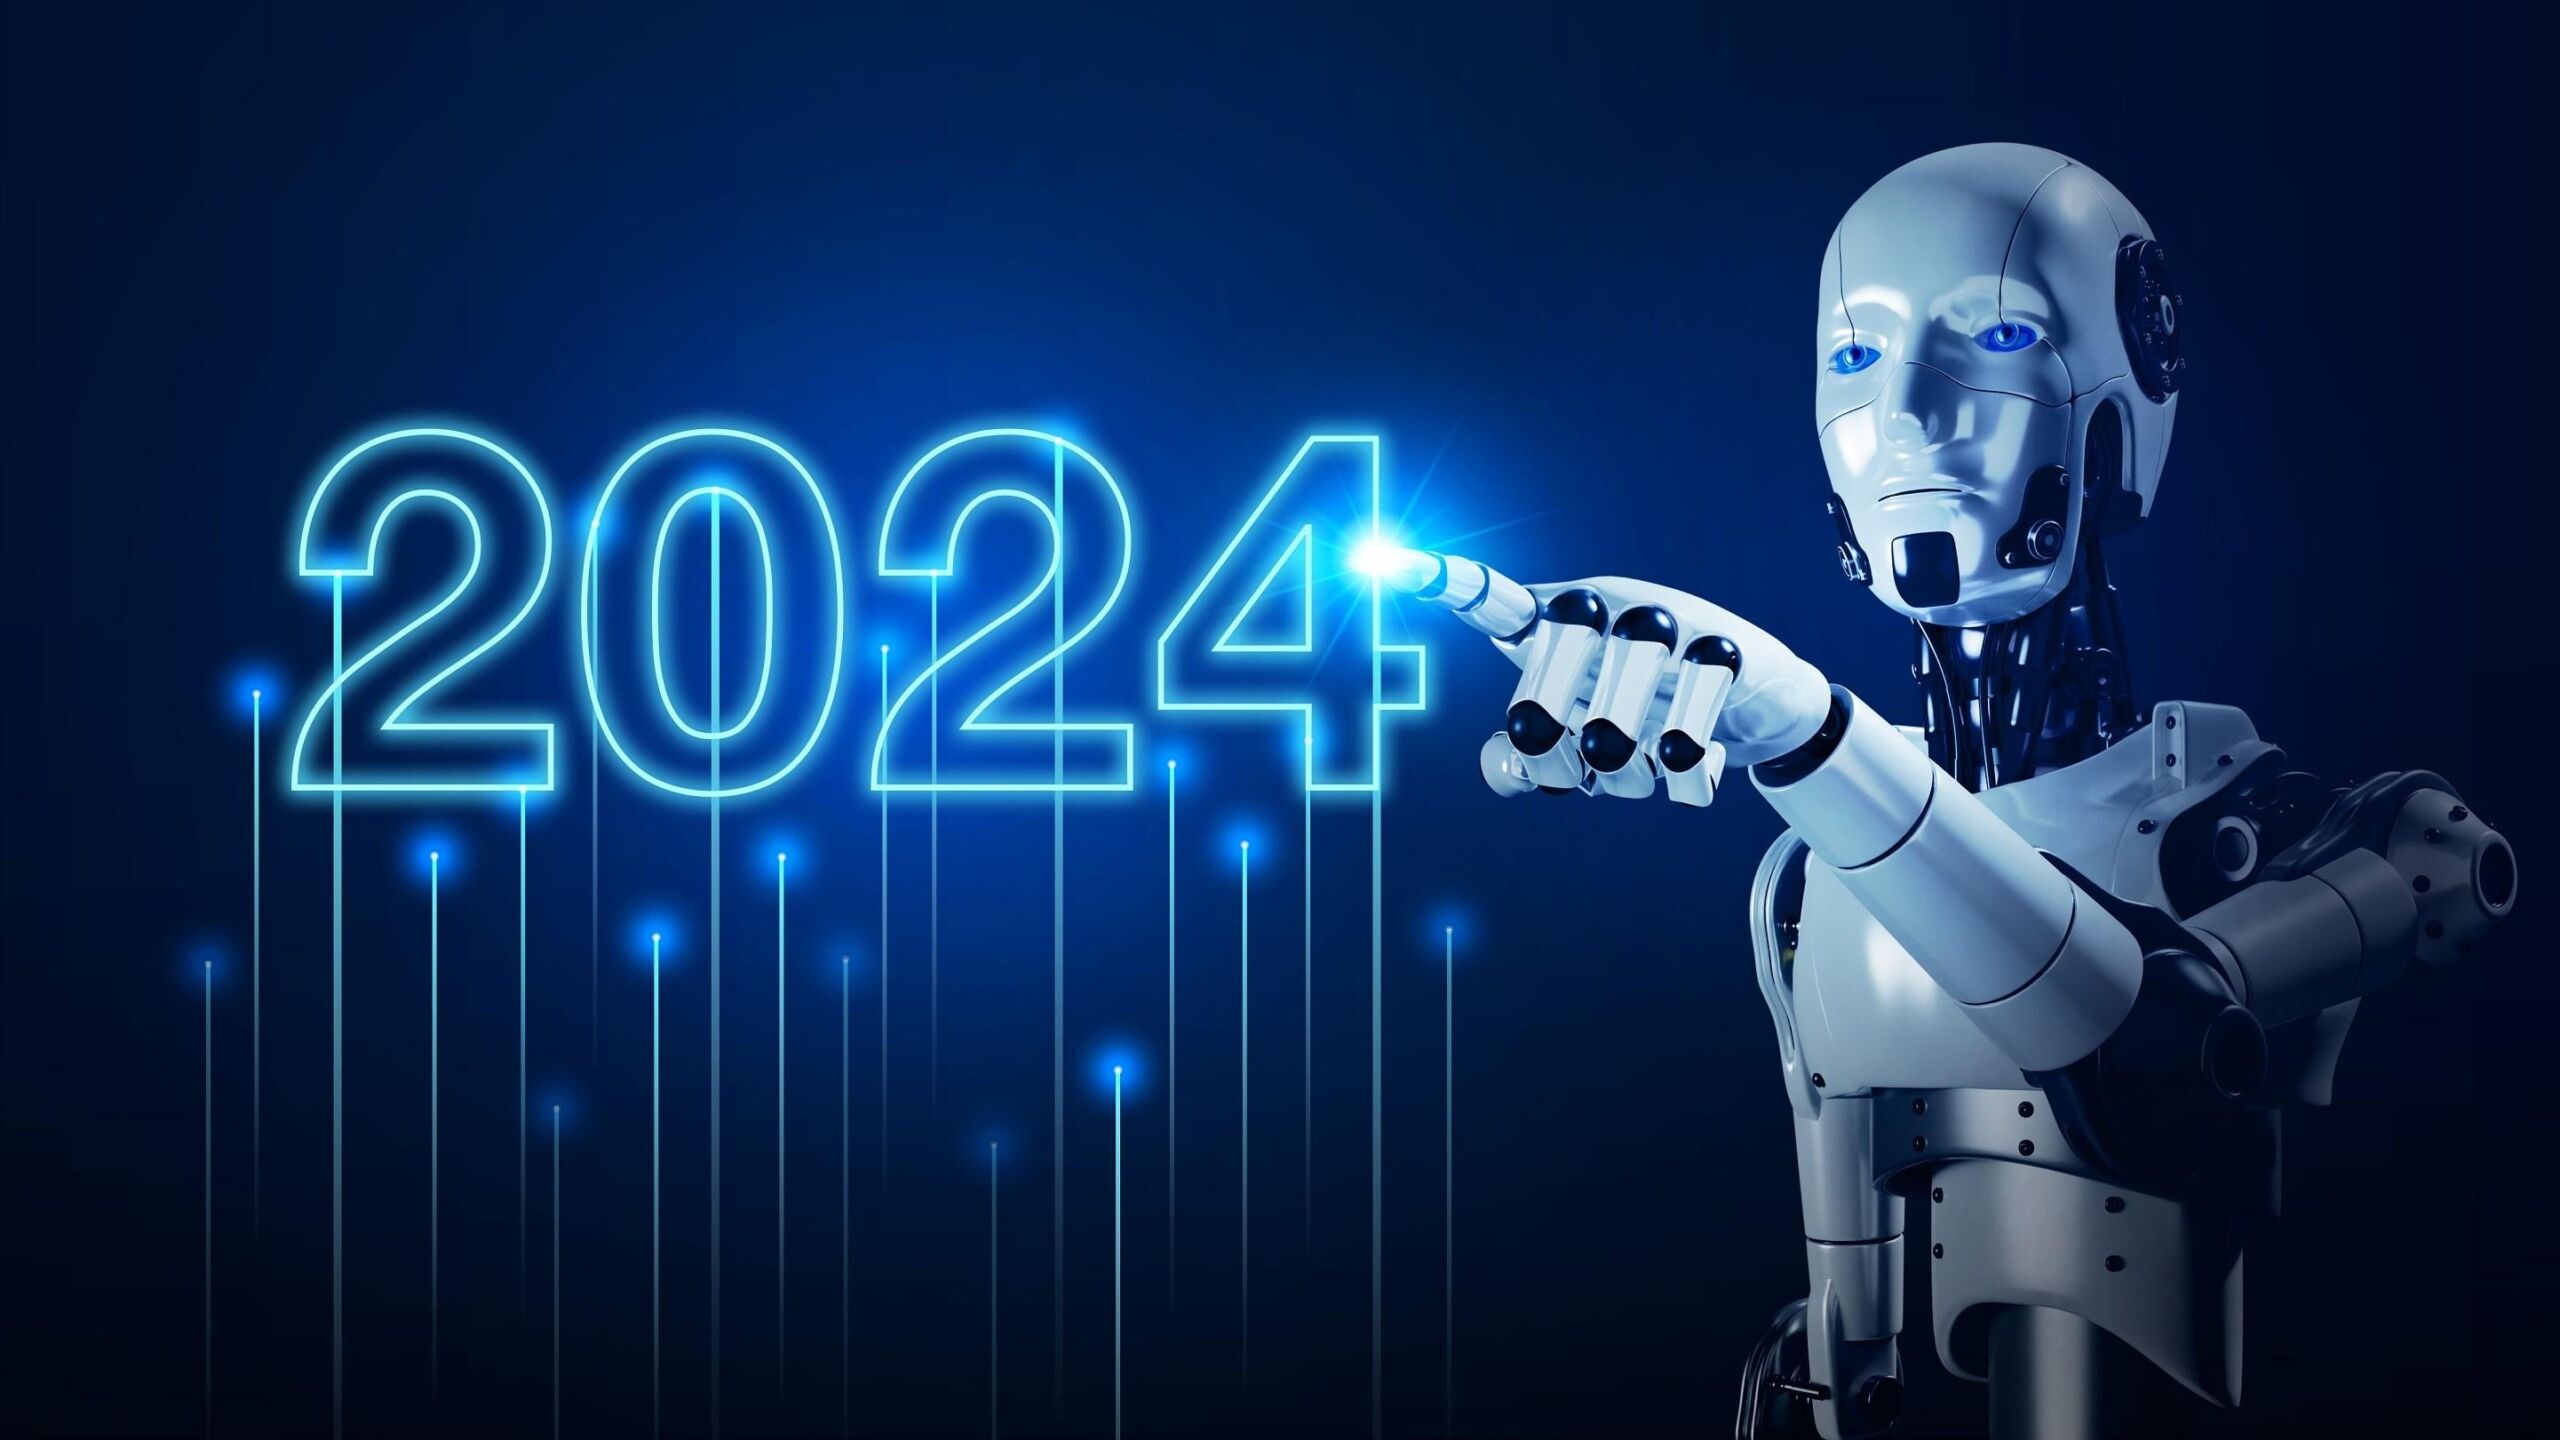 A robot is showcasing the word 2024 at a business networking event.